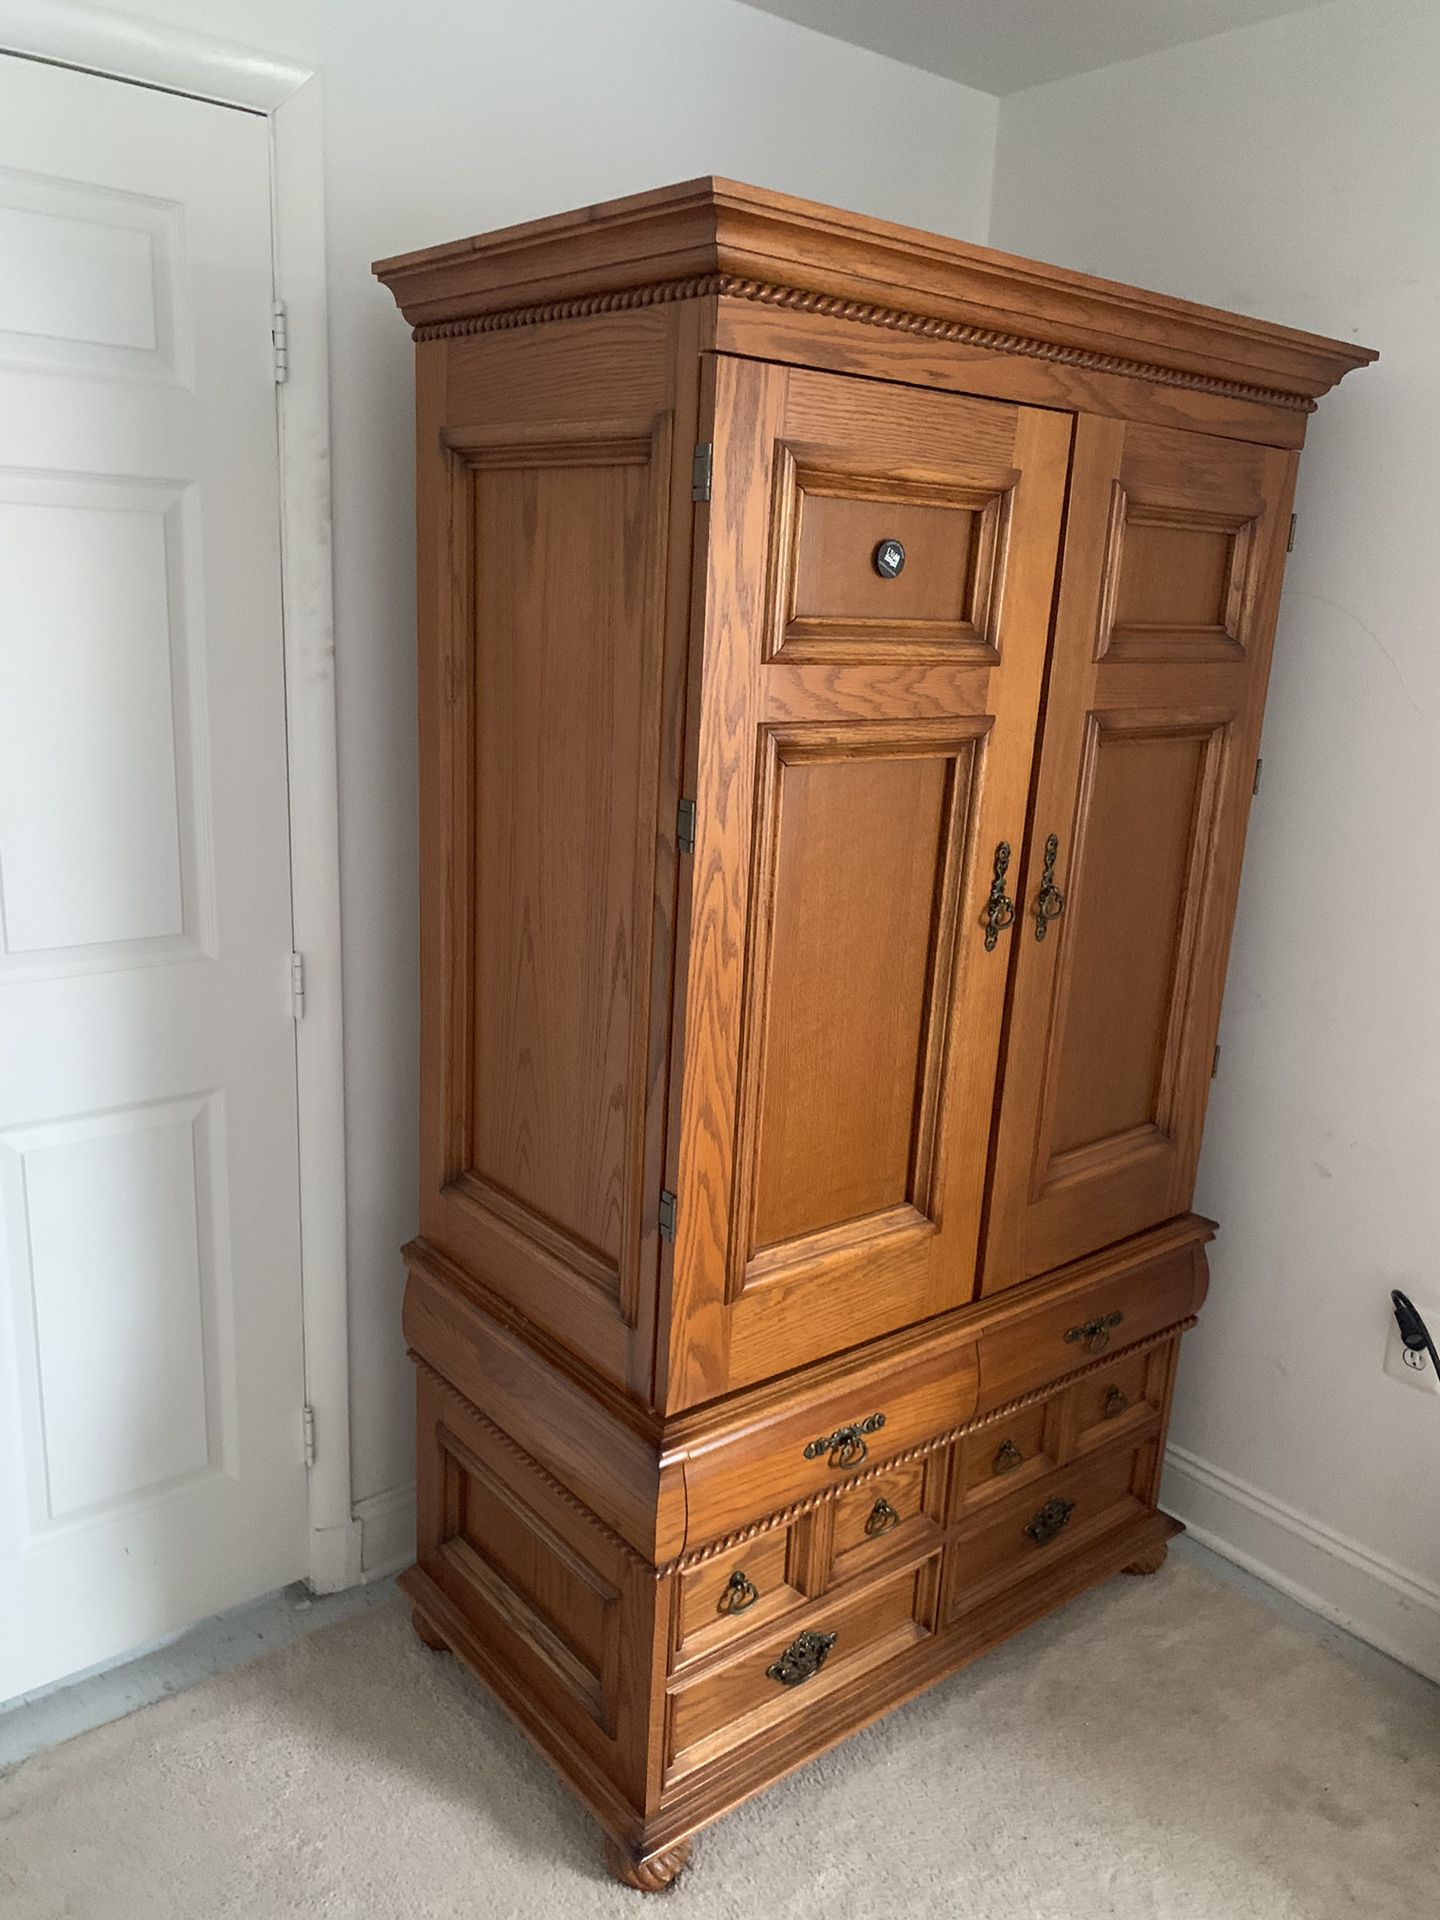 Country Pine Antique Armoire, Wardrobe or Closet